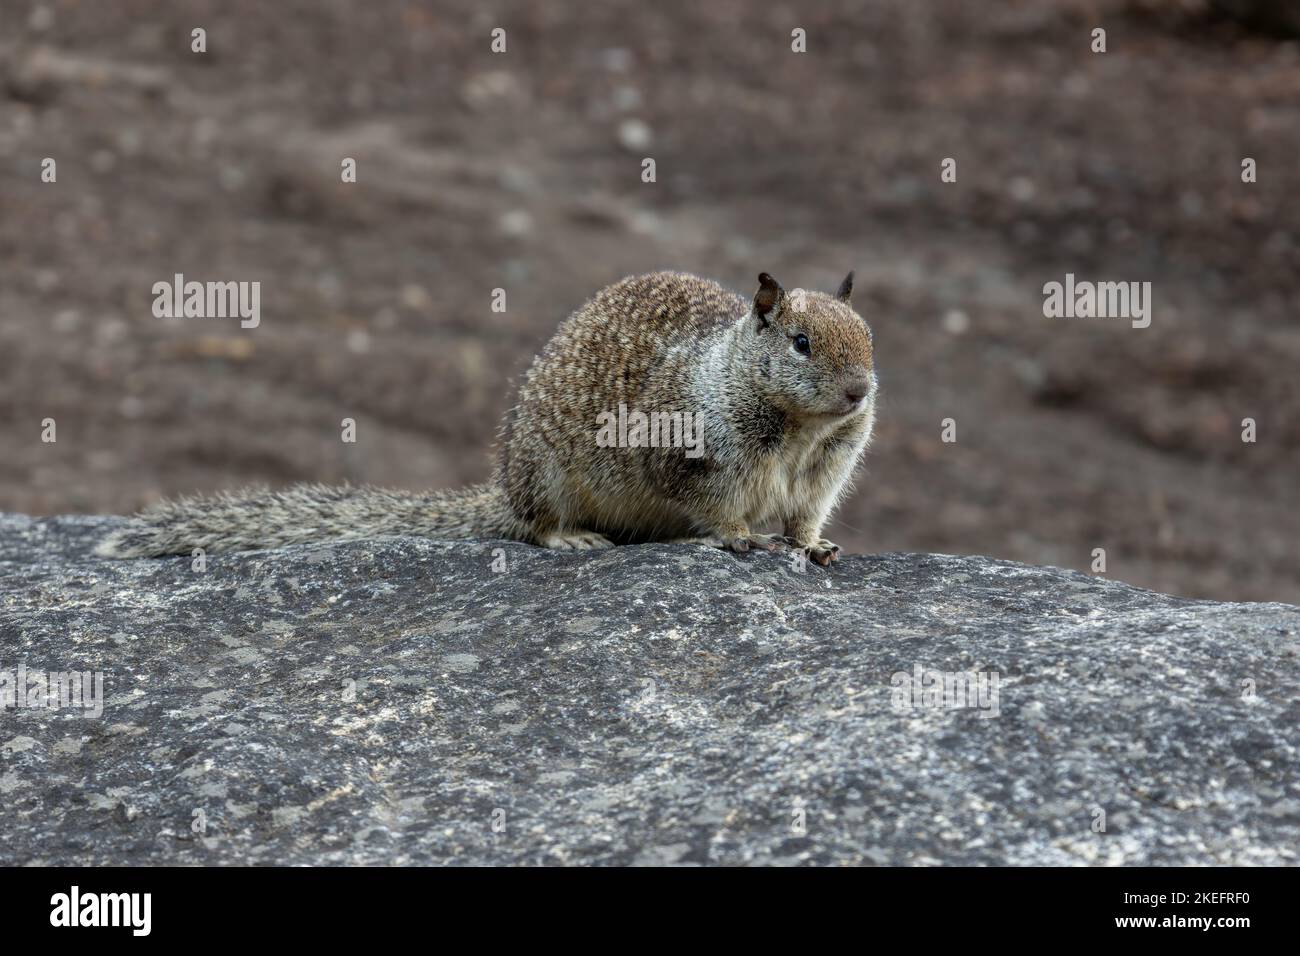 California ground squirrel or in Latin Spermophilus beecheyi is a rodent in the family Sciuridae, photographed in Yosemite National park Stock Photo